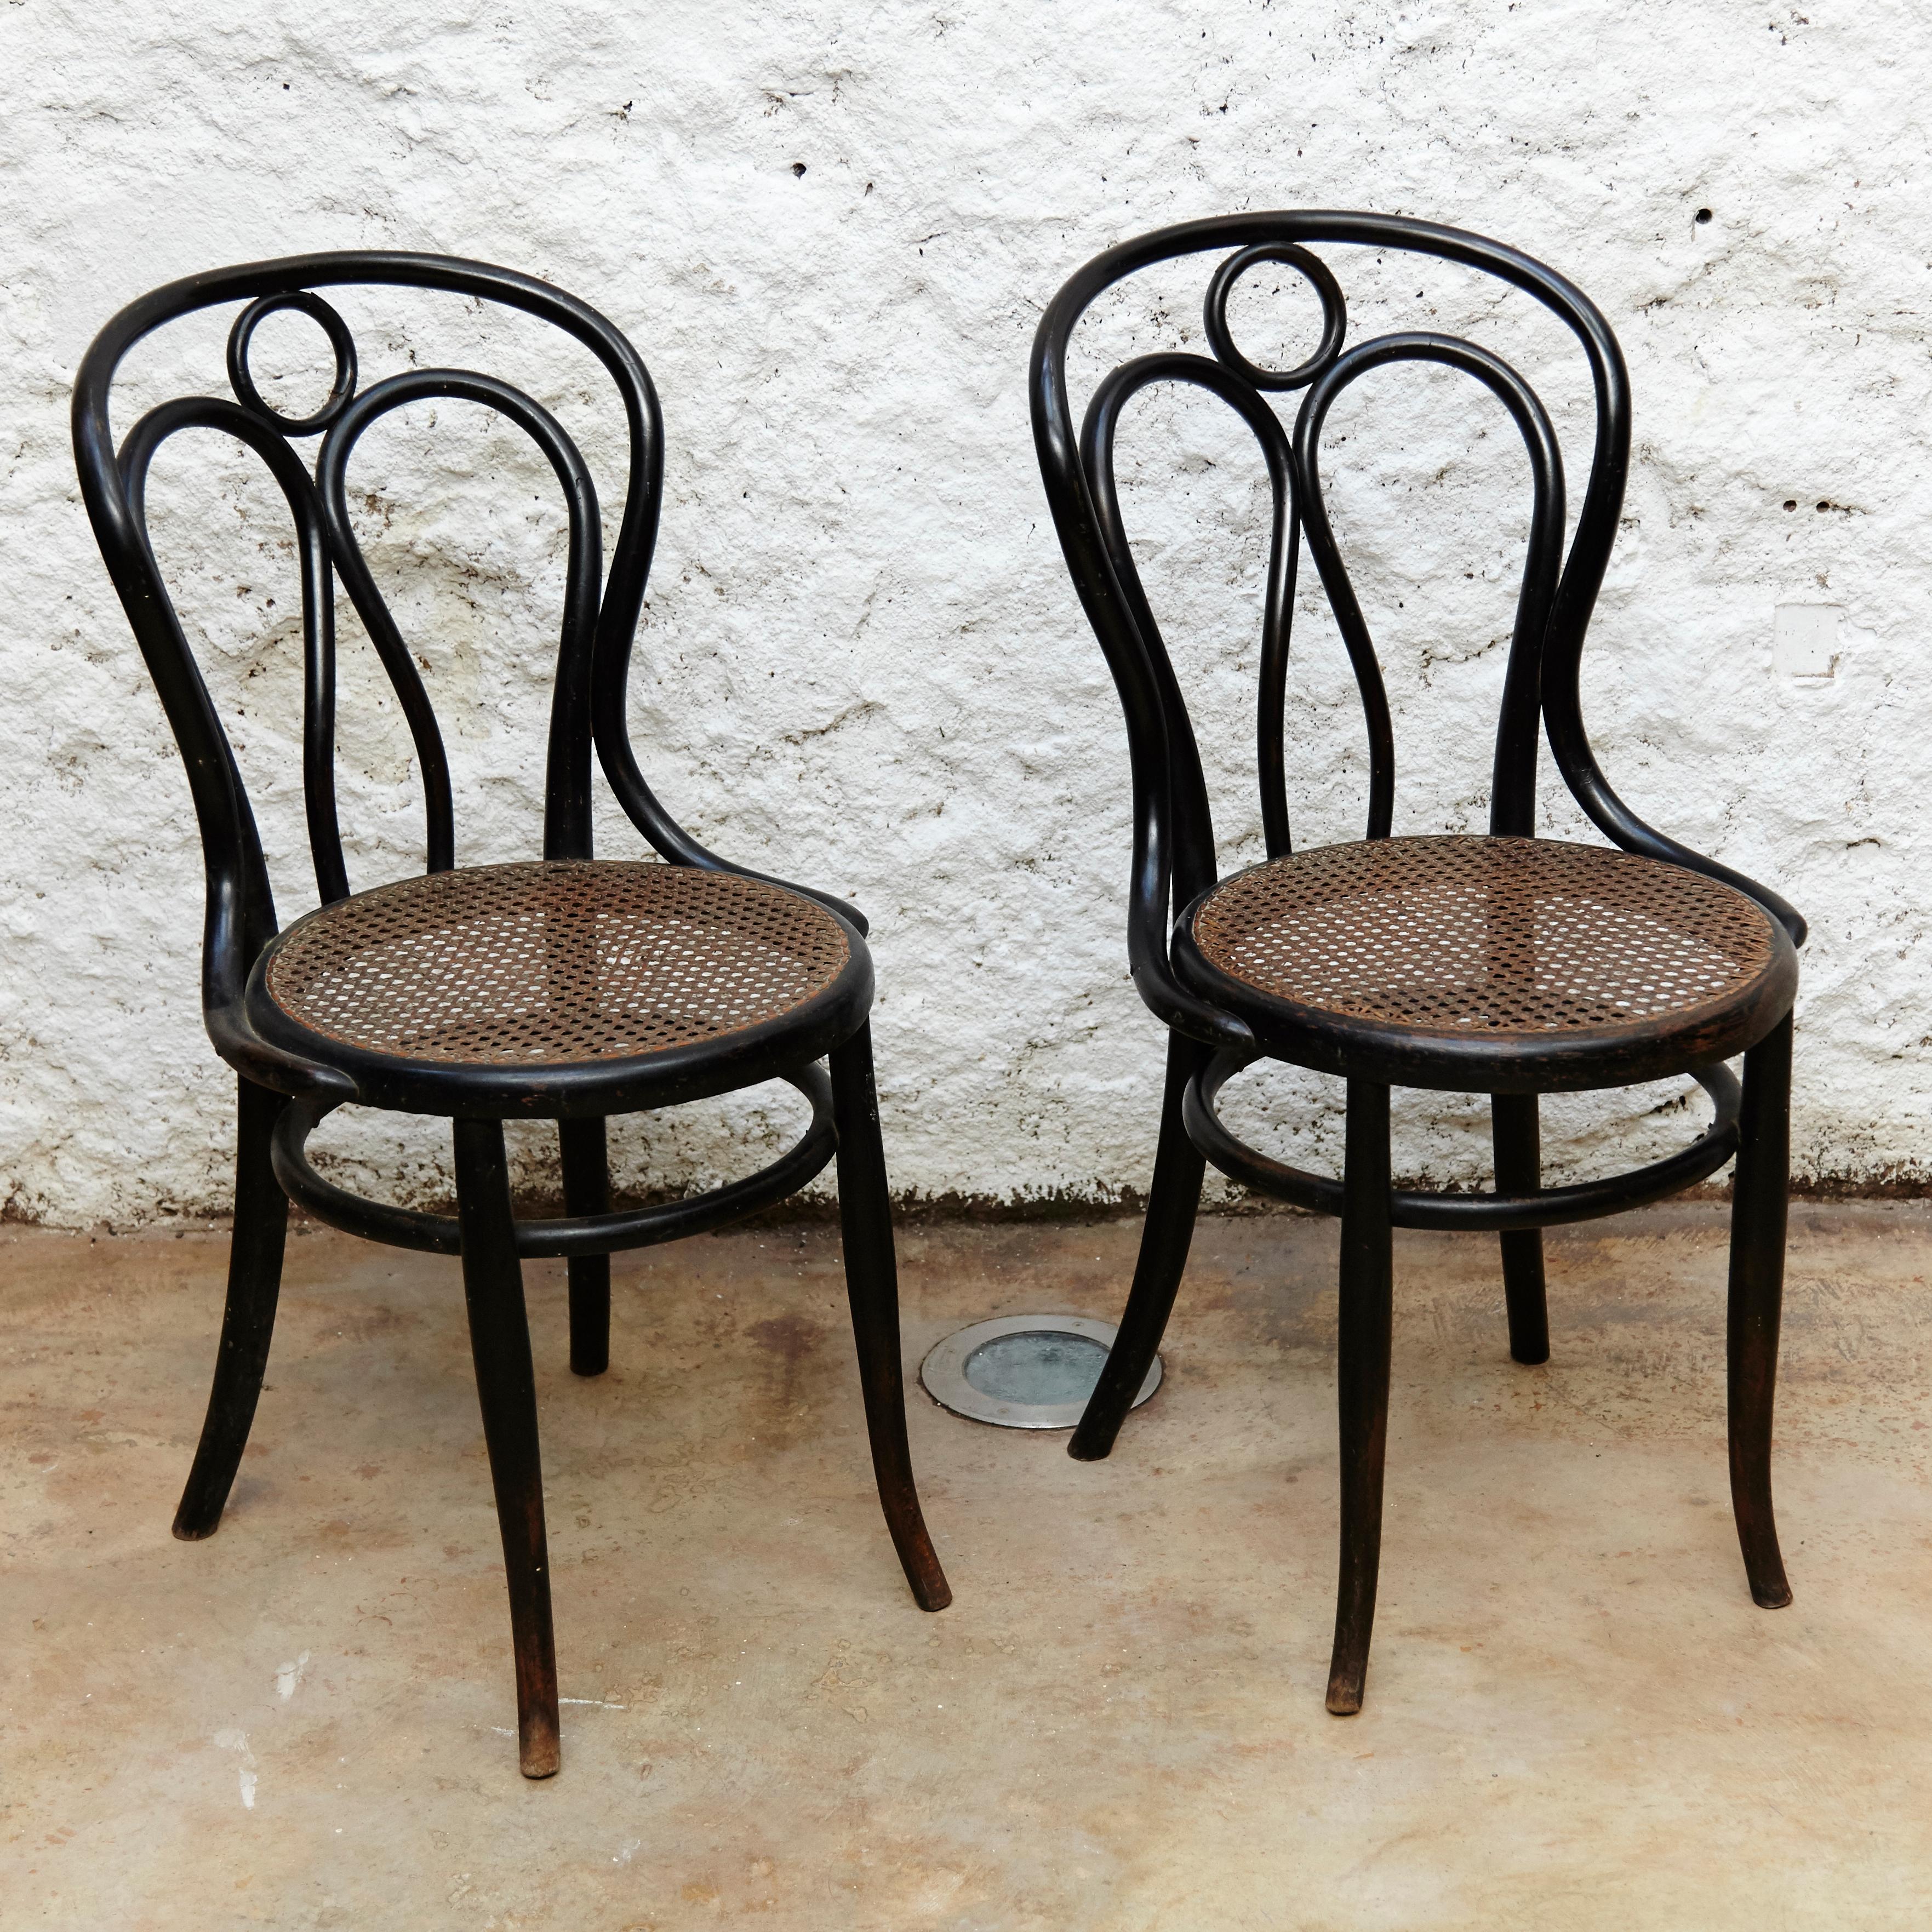 Hofman bentwood pair of chairs, circa 1900, Austria 

In original condition, with minor wear consistent with age and use, preserving a beautiful patina. One of the seats is a bit damaged.

Bentwood and rattan.